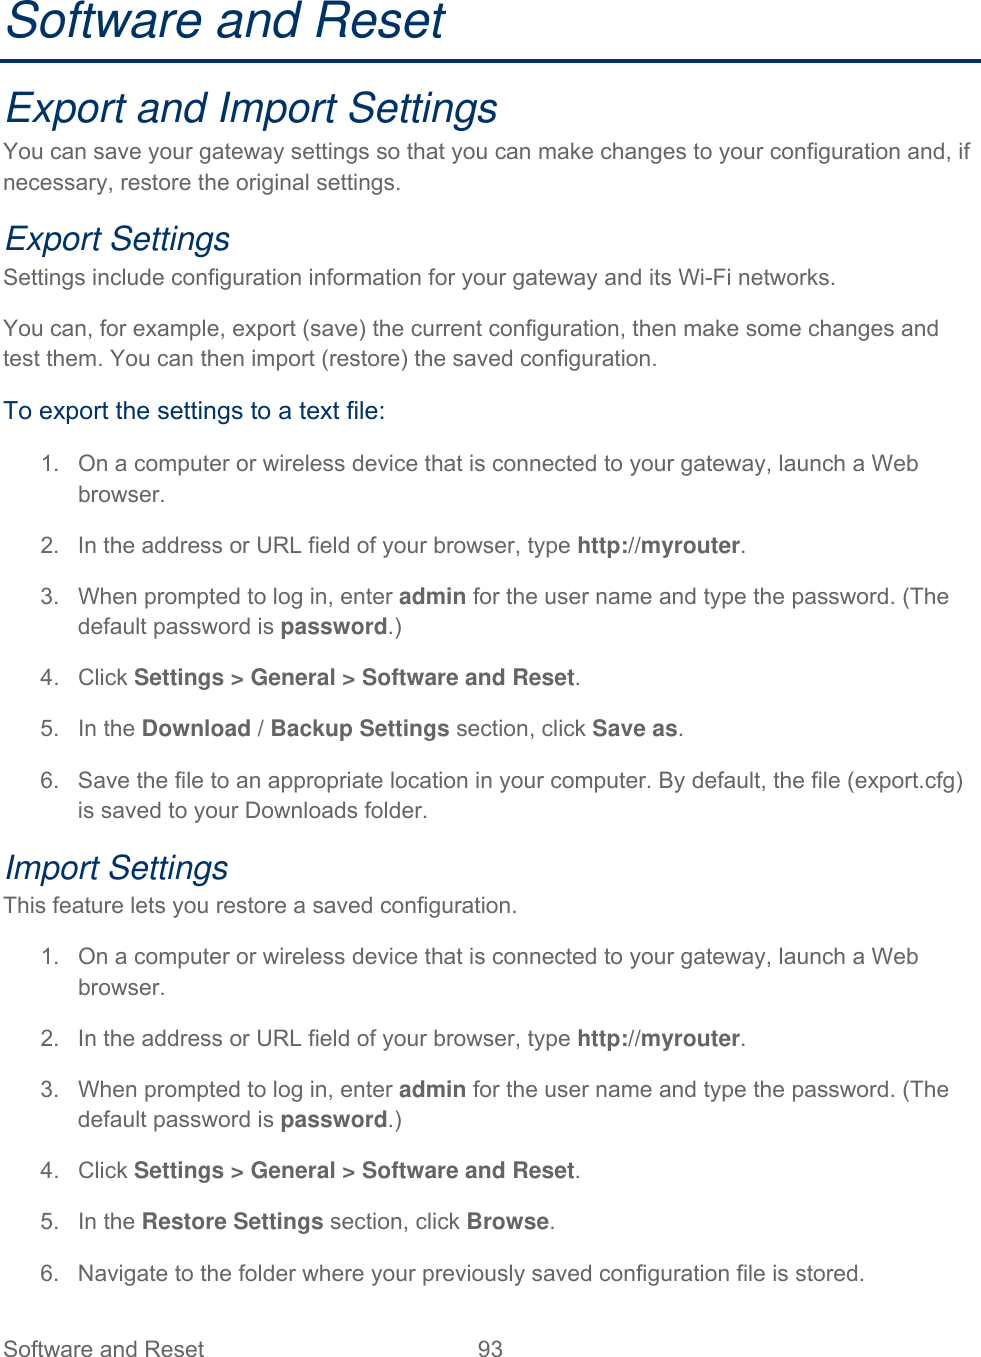 Software and Reset  93   Software and Reset Export and Import Settings You can save your gateway settings so that you can make changes to your configuration and, if necessary, restore the original settings. Export Settings Settings include configuration information for your gateway and its Wi-Fi networks. You can, for example, export (save) the current configuration, then make some changes and test them. You can then import (restore) the saved configuration. To export the settings to a text file: 1.  On a computer or wireless device that is connected to your gateway, launch a Web browser. 2.  In the address or URL field of your browser, type http://myrouter.  3.  When prompted to log in, enter admin for the user name and type the password. (The default password is password.) 4. Click Settings &gt; General &gt; Software and Reset. 5. In the Download / Backup Settings section, click Save as. 6.  Save the file to an appropriate location in your computer. By default, the file (export.cfg) is saved to your Downloads folder. Import Settings This feature lets you restore a saved configuration. 1.  On a computer or wireless device that is connected to your gateway, launch a Web browser. 2.  In the address or URL field of your browser, type http://myrouter.  3.  When prompted to log in, enter admin for the user name and type the password. (The default password is password.) 4. Click Settings &gt; General &gt; Software and Reset. 5. In the Restore Settings section, click Browse. 6.  Navigate to the folder where your previously saved configuration file is stored. 